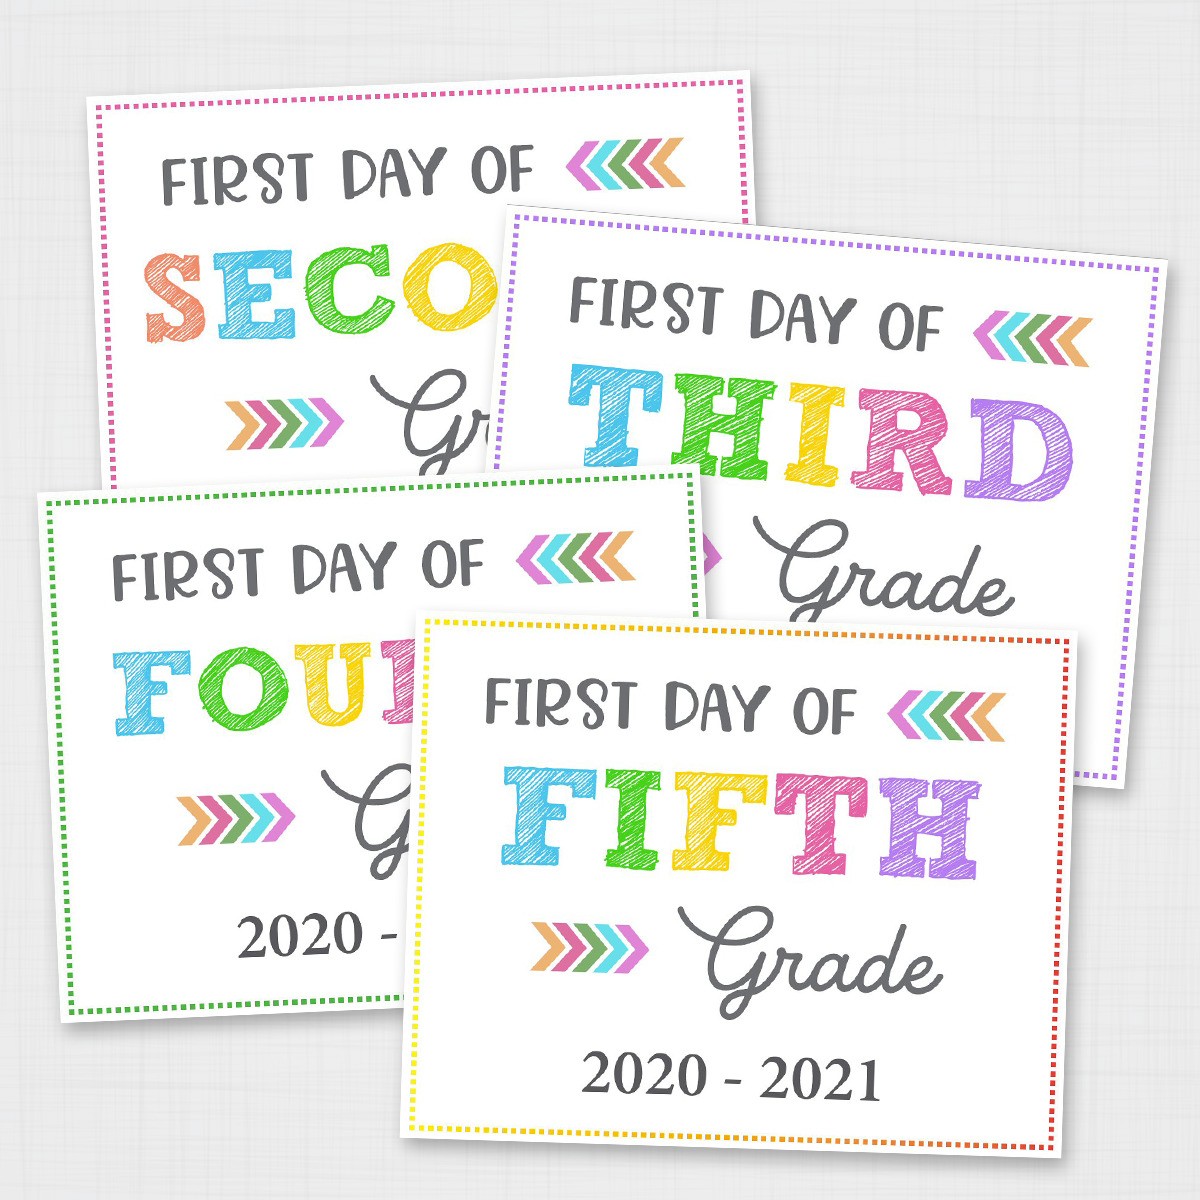 editable-first-day-of-school-signs-printable-colorful-gambaran